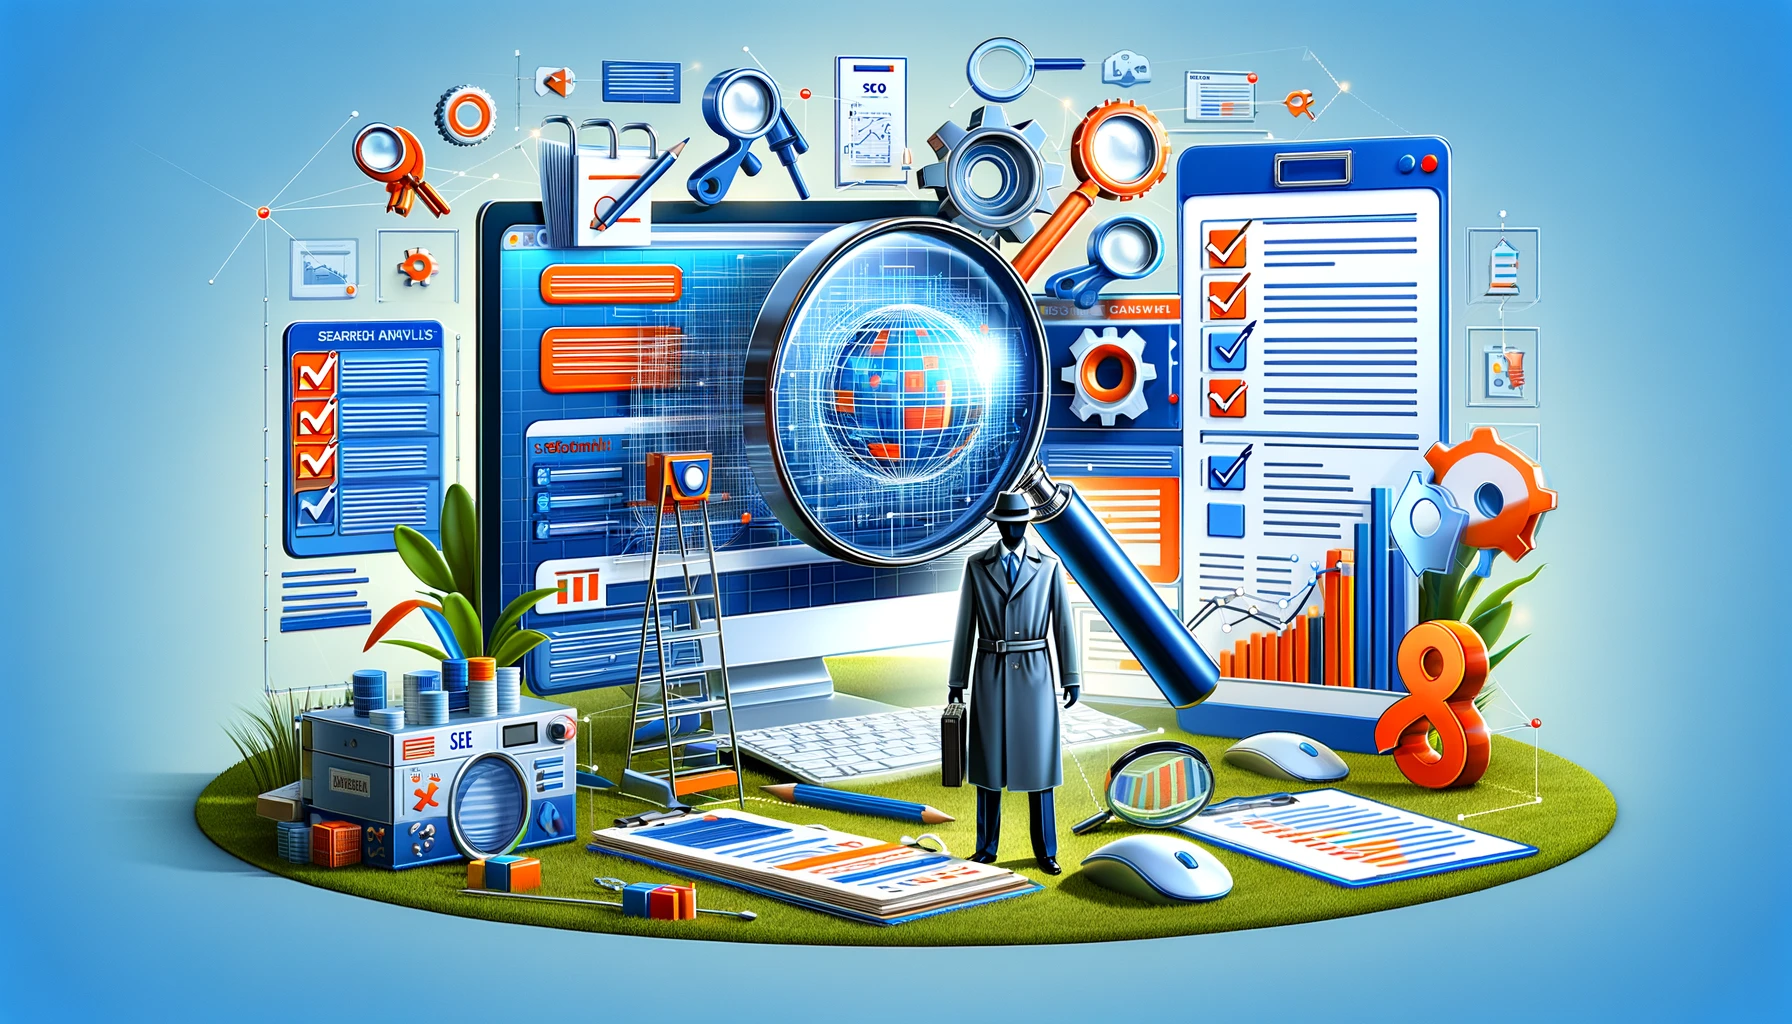 Illustration of Technical SEO Audit showing a magnifying glass over a website structure, SEO tools, checklists for technical aspects, and analytics display, representing the detailed process of enhancing search engine performance.